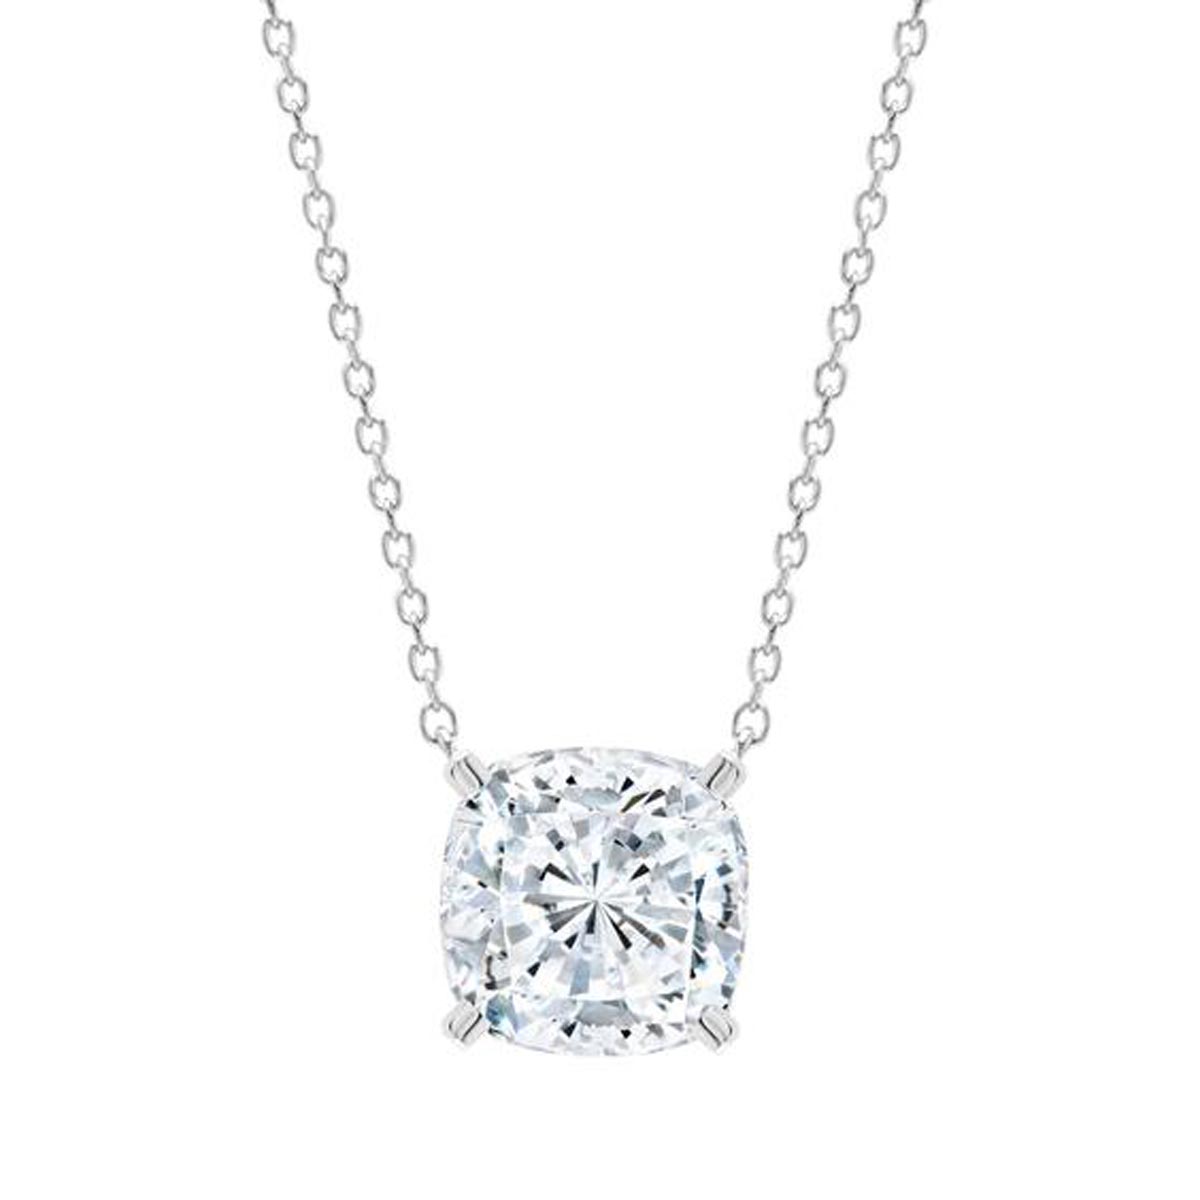 Crislu Cushion Cut Cubic Zirconia Bliss Necklace in Sterling Silver with Platinum Finish